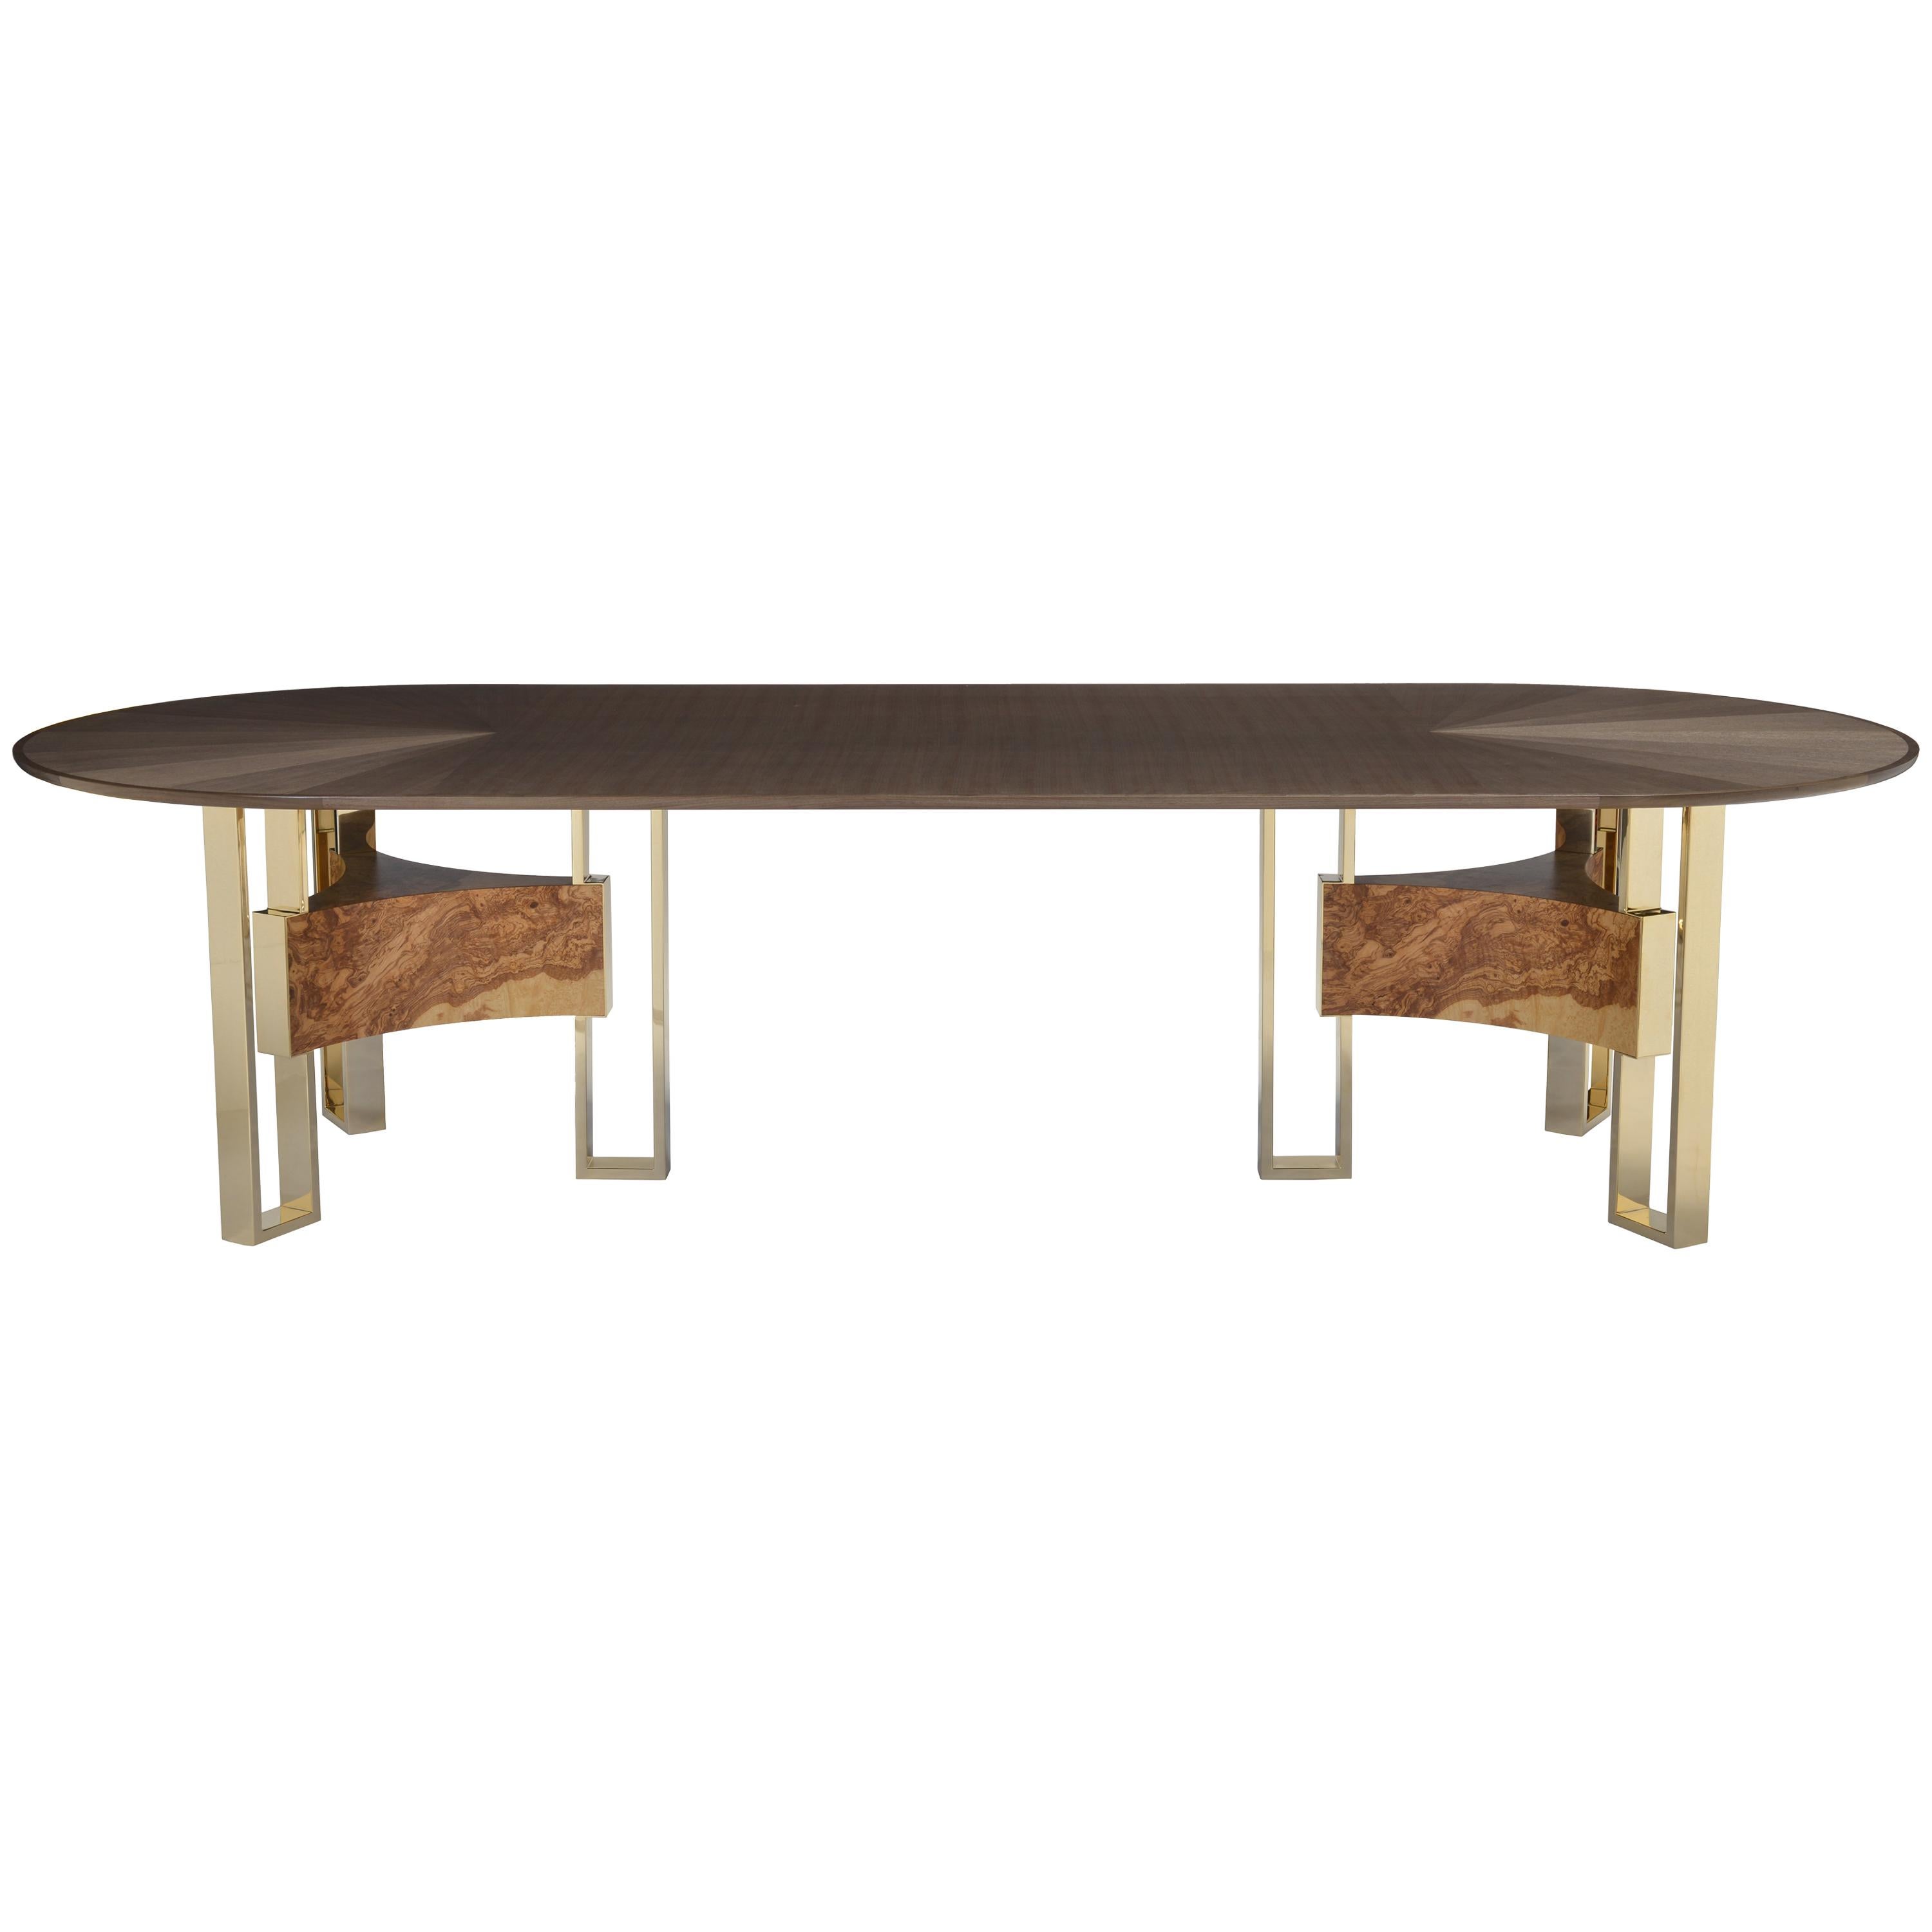 Donghia Starre Obround Dining Table, Walnut Wood with Open Grain Finish For Sale